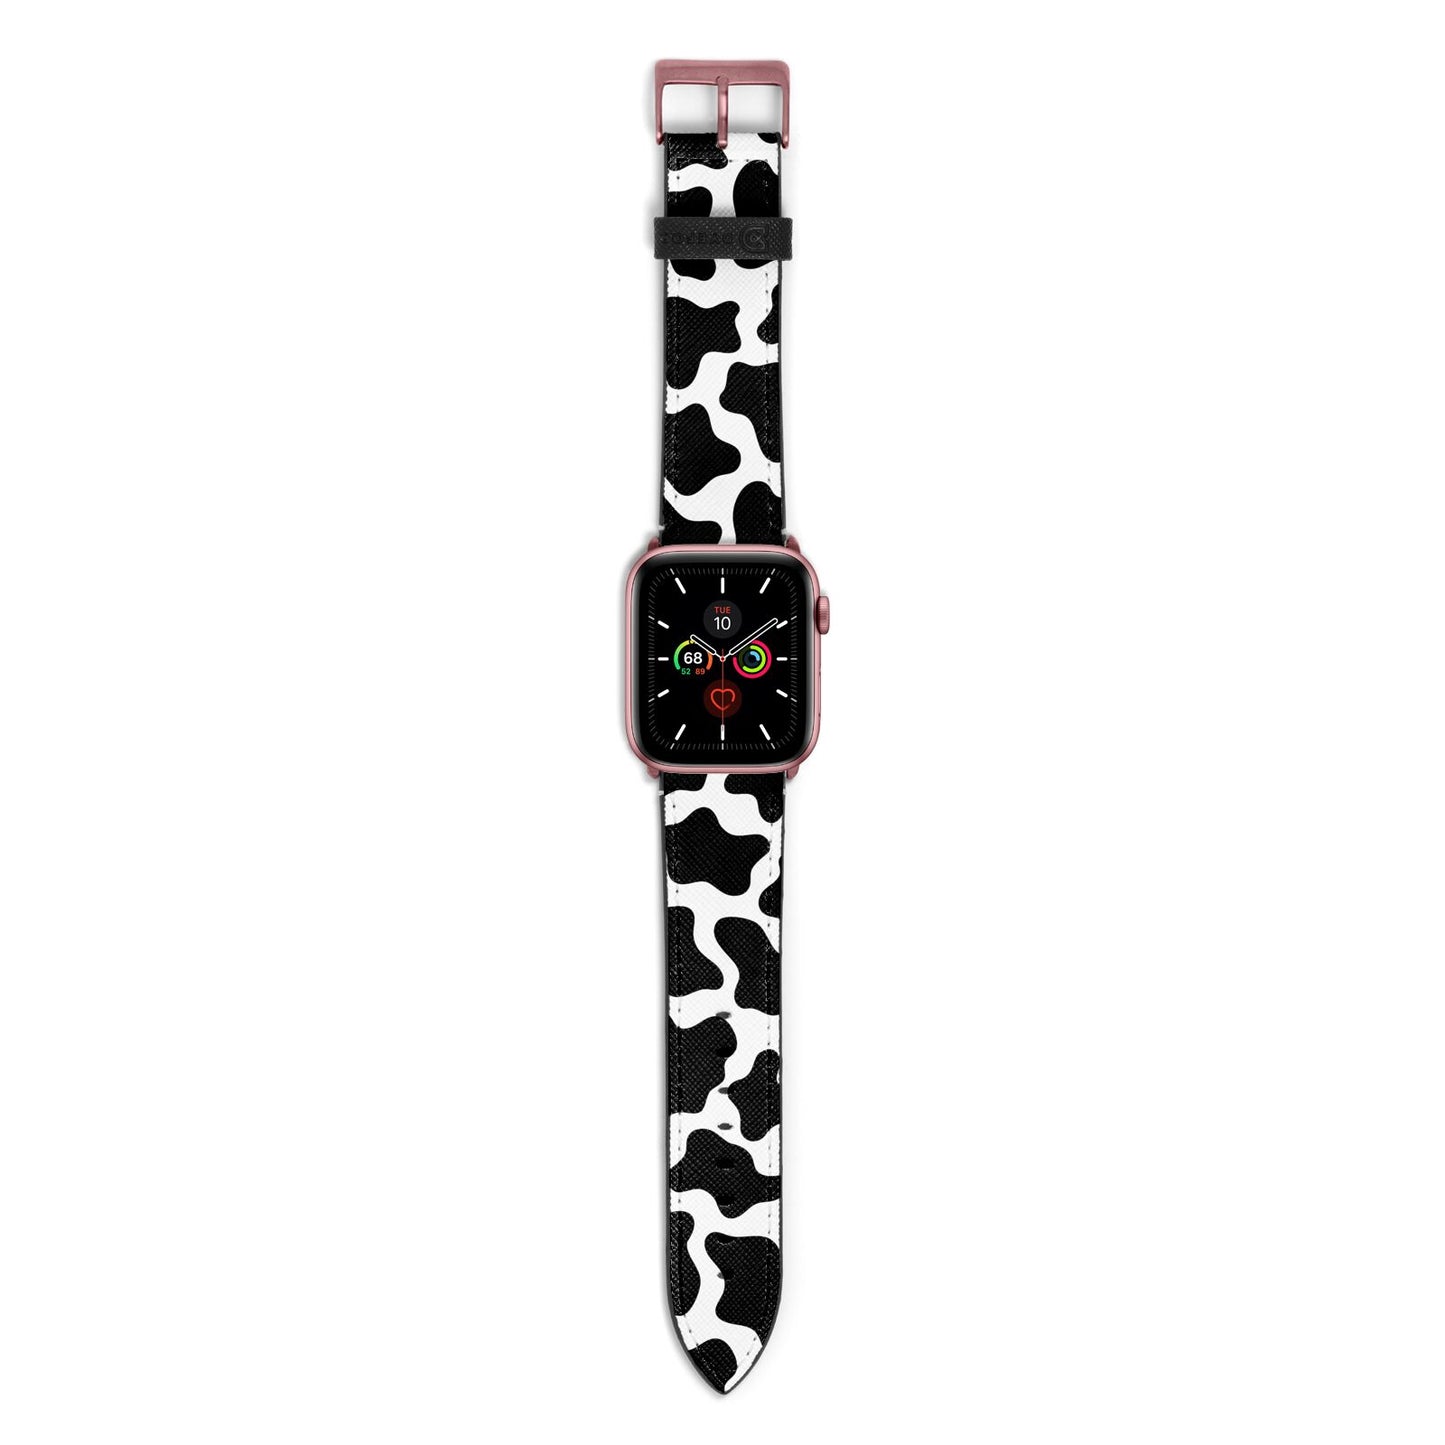 Cow Print Apple Watch Strap with Rose Gold Hardware